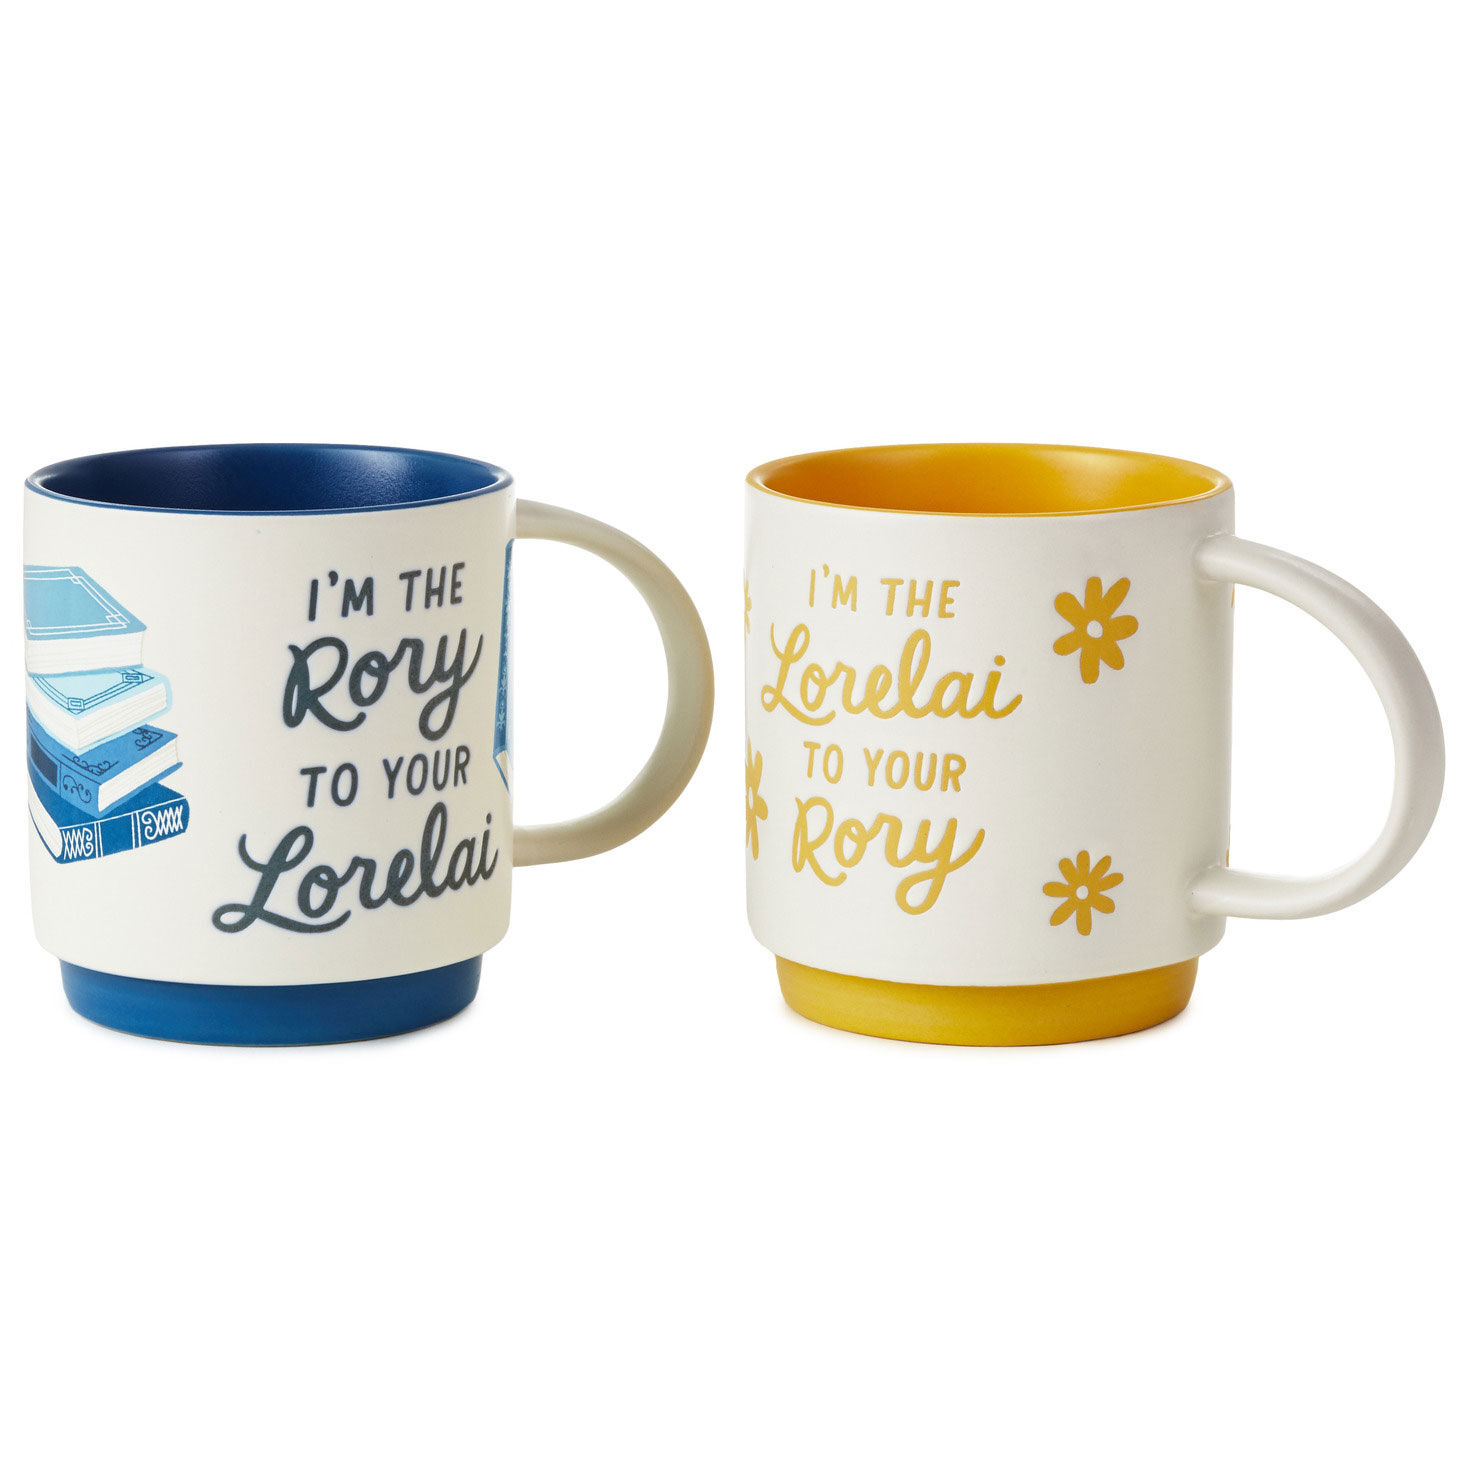 https://www.hallmark.com/dw/image/v2/AALB_PRD/on/demandware.static/-/Sites-hallmark-master/default/dwbf3fe5c1/images/finished-goods/products/1PCL1008/Gilmore-Girls-Lorelai-and-Rory-Stacking-Mug-Set_1PCL1008_01.jpg?sfrm=jpg